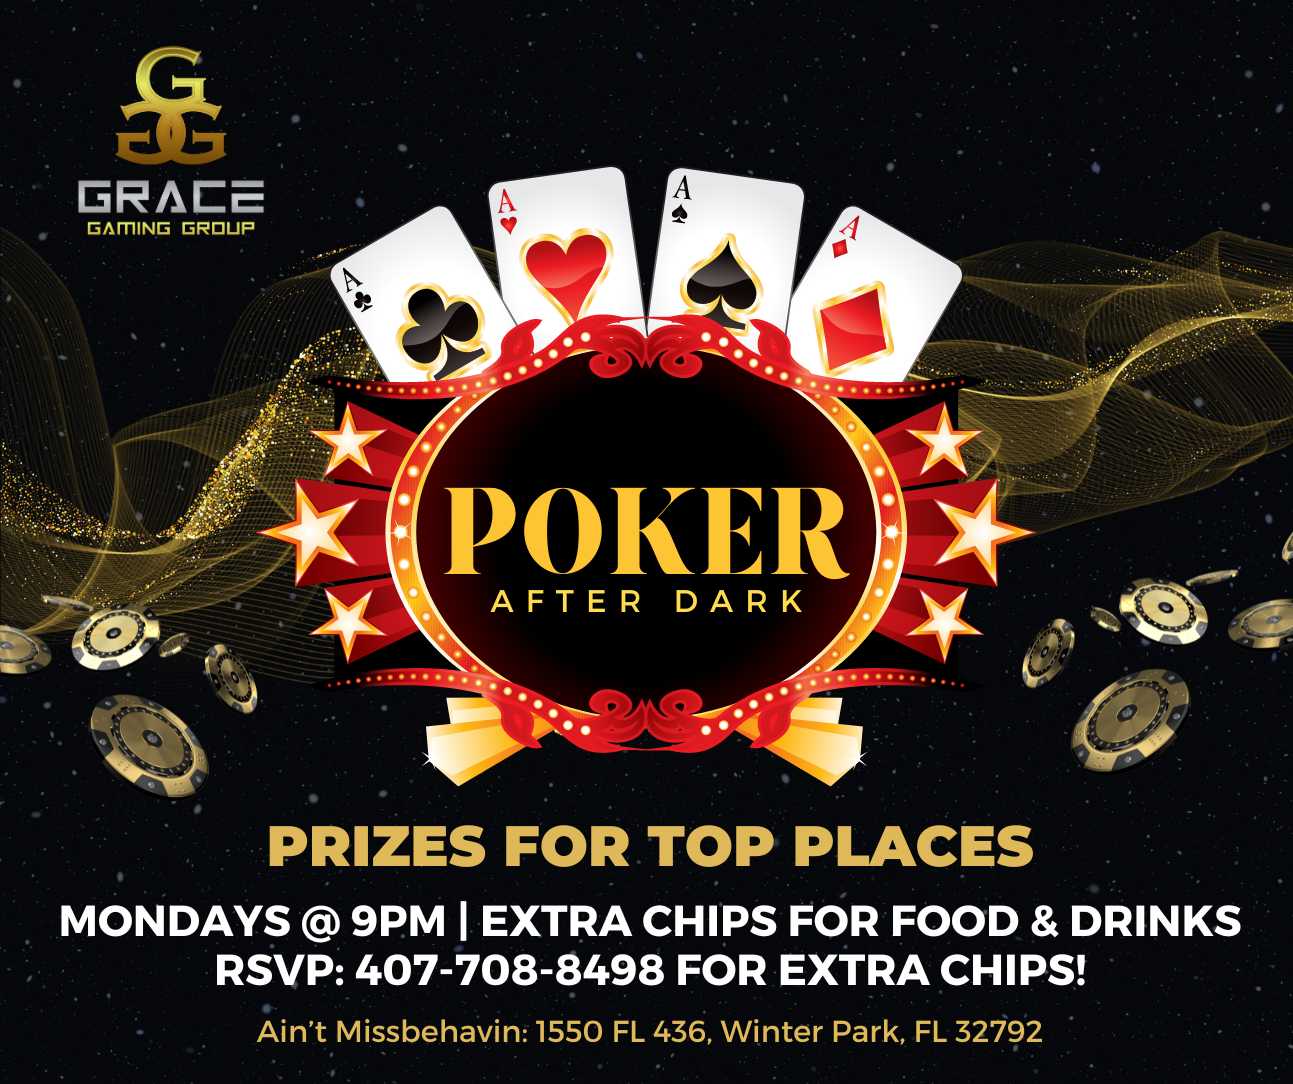 A poster for a poker after dark event